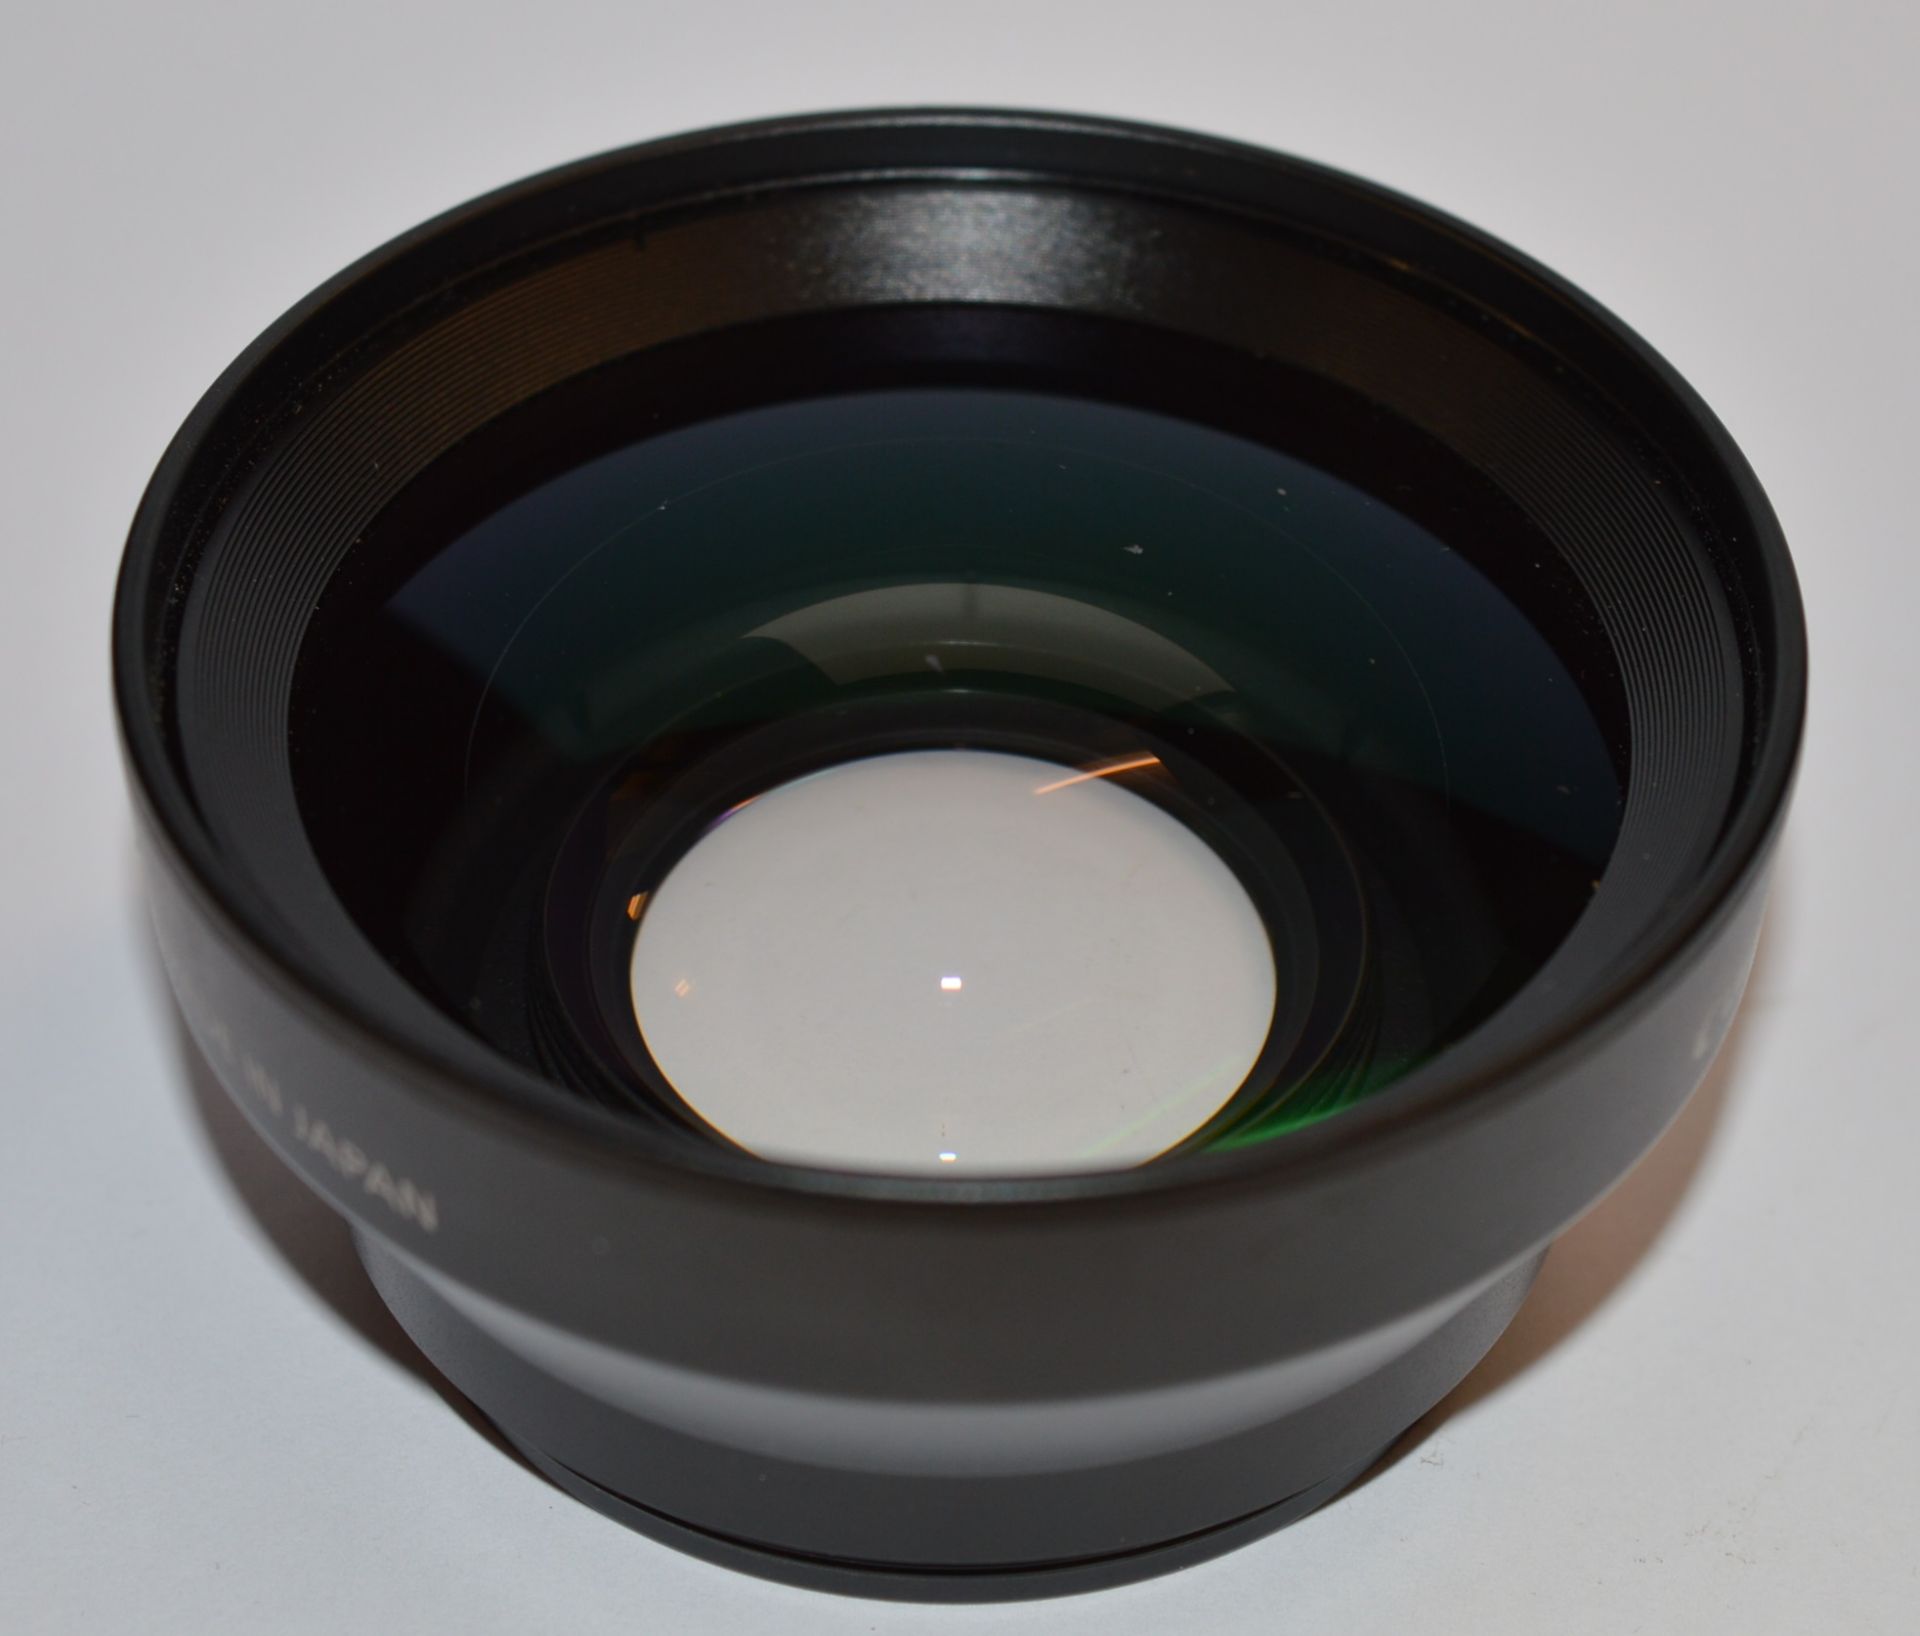 1 x Canon WC-DC58A 0.75x Wide Angle Converter Lens - CL011 - Ref JP137 - Very Good Condition - - Image 3 of 6